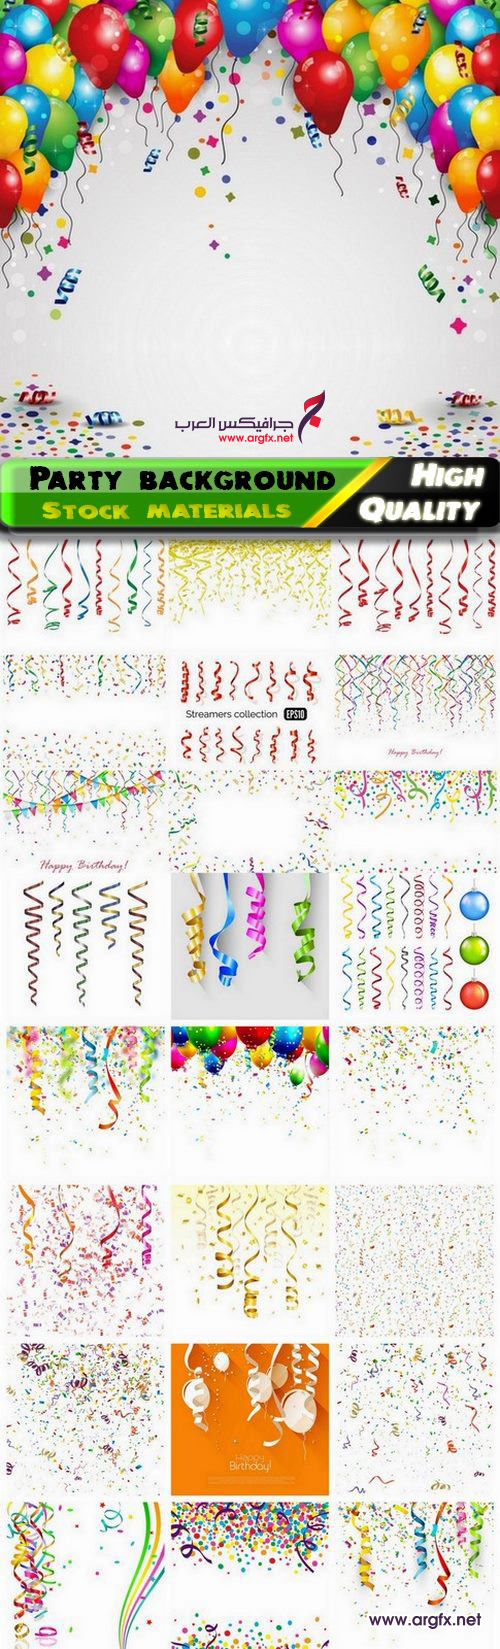  Birthday and party background with streamers confetti balloon 25 Eps